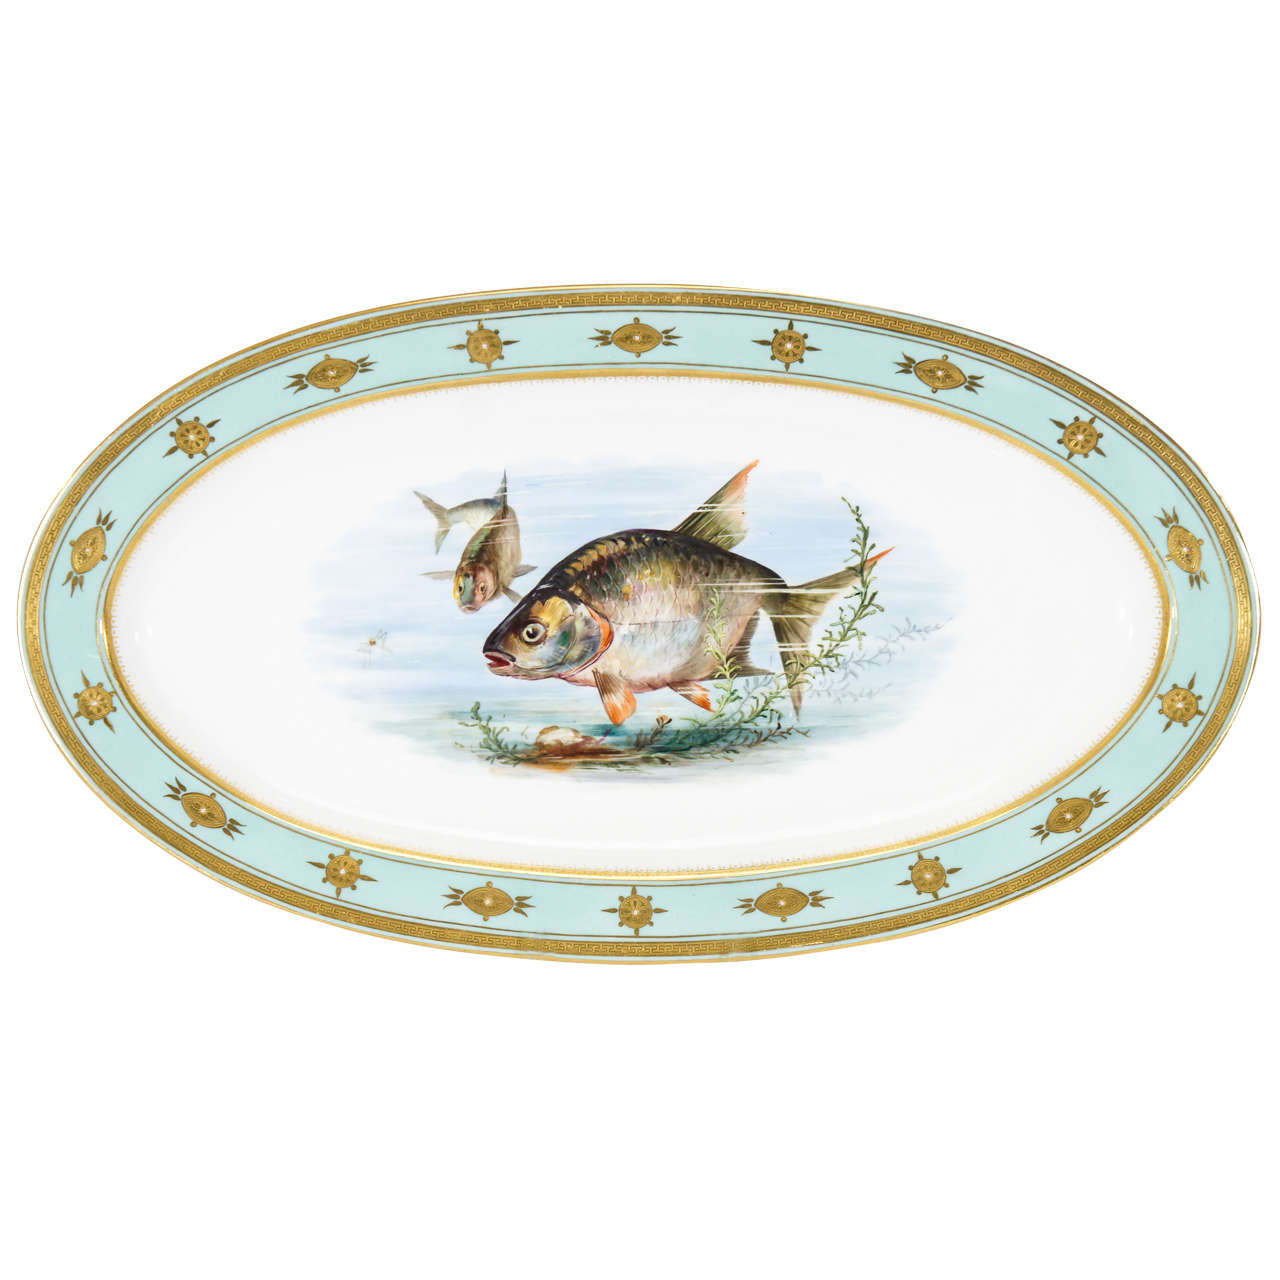 Minton 19th Century Aesthetic Movement Hand-Painted Fish Platter For Sale